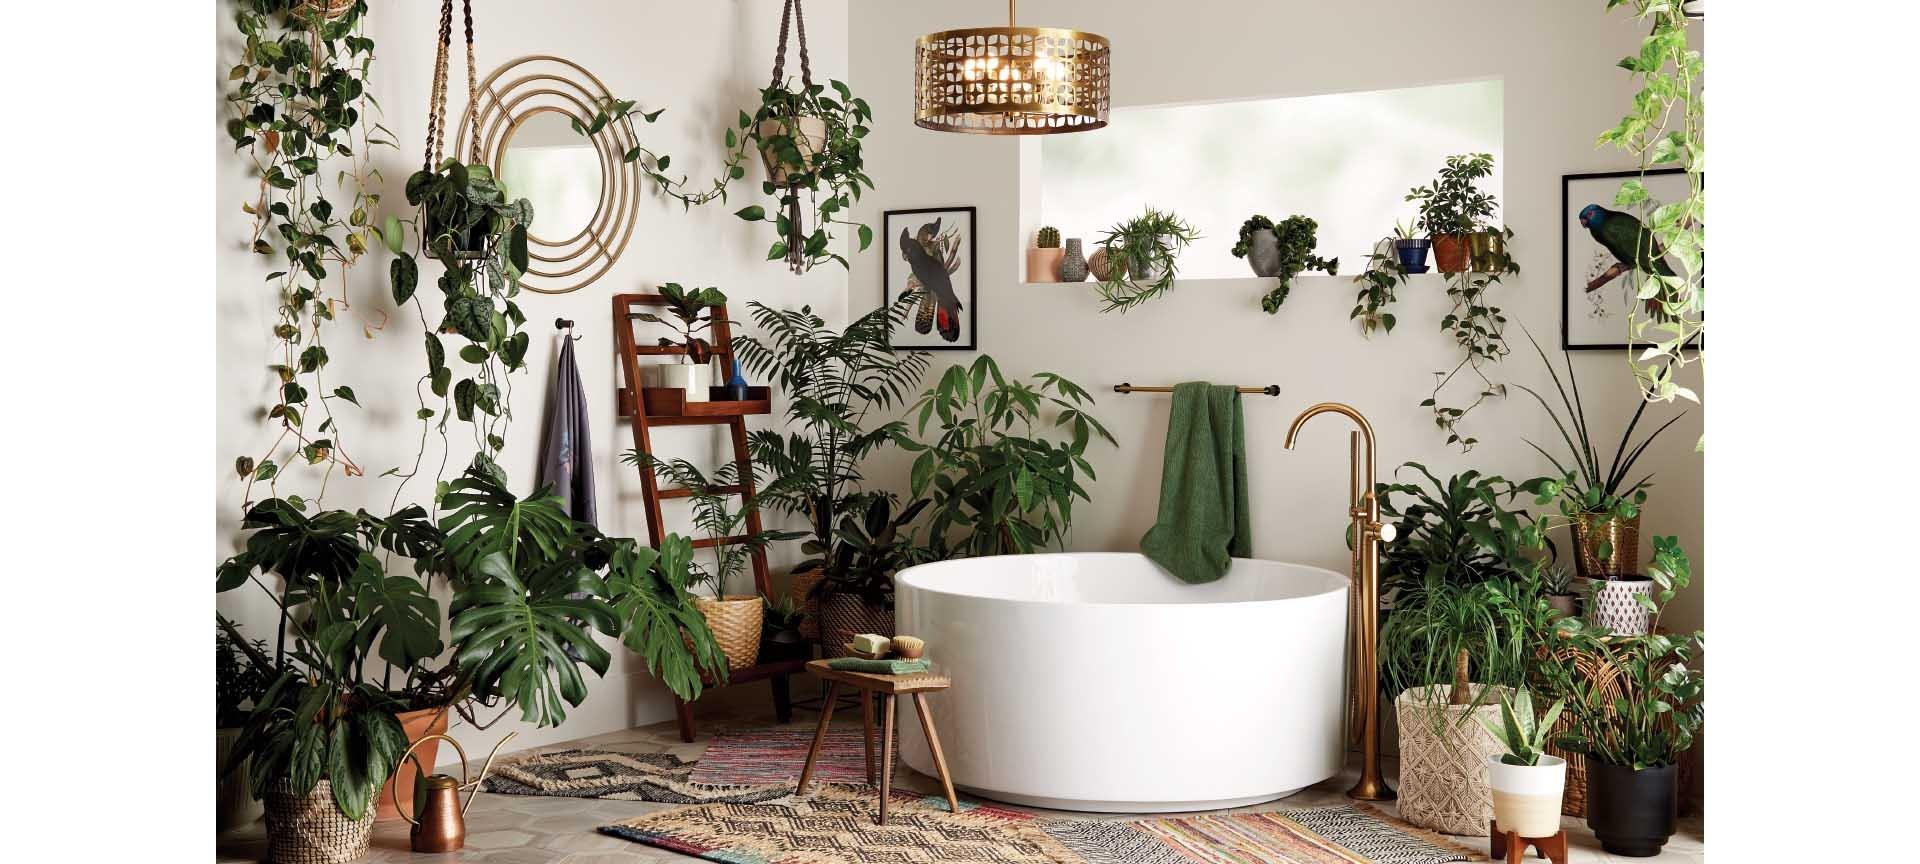 Bohemian style bathroom with 55" Dempsey Round Acrylic Freestanding Tub, Lentz Freestanding Tub Faucet in Brushed Gold